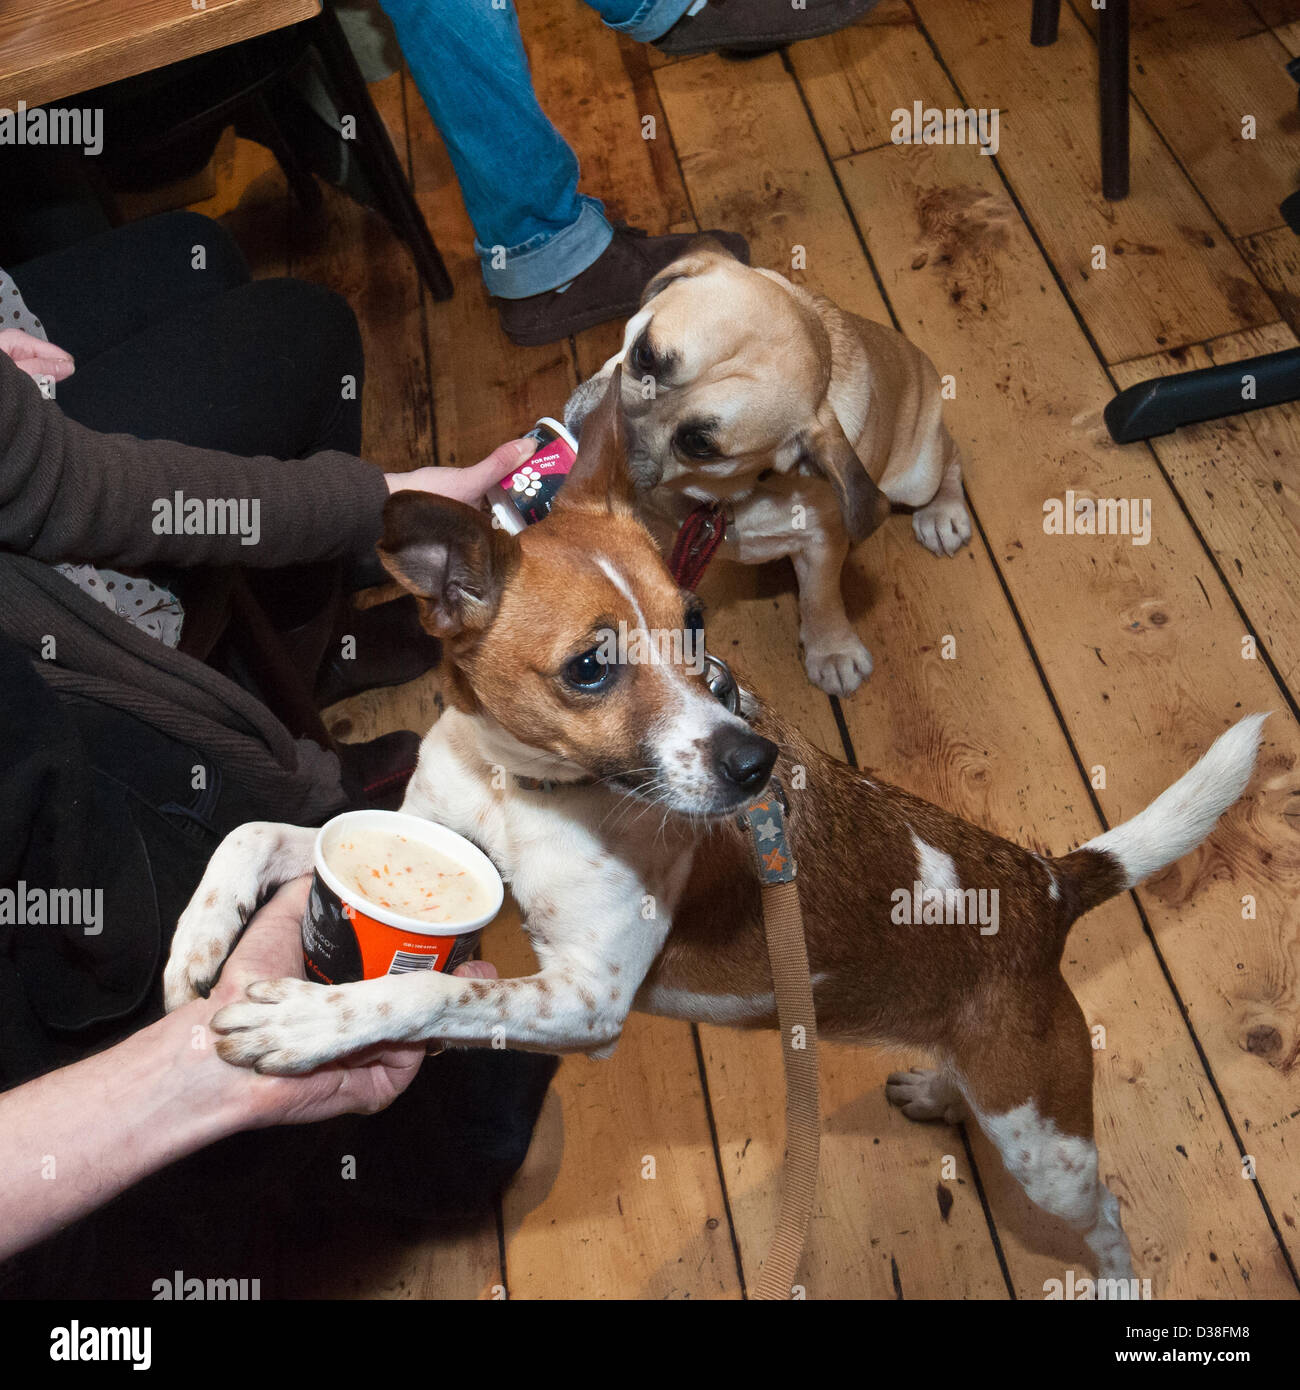 All this good food quite makes one's head spin - happy doggy diners enjoy My Doggy Valentine Dinner for dogs and friends whilst fundraising for the Dogs Trust at the Coal Shed Restaurant, Brighton. 12th February 2013 photo©Julia Claxton Stock Photo